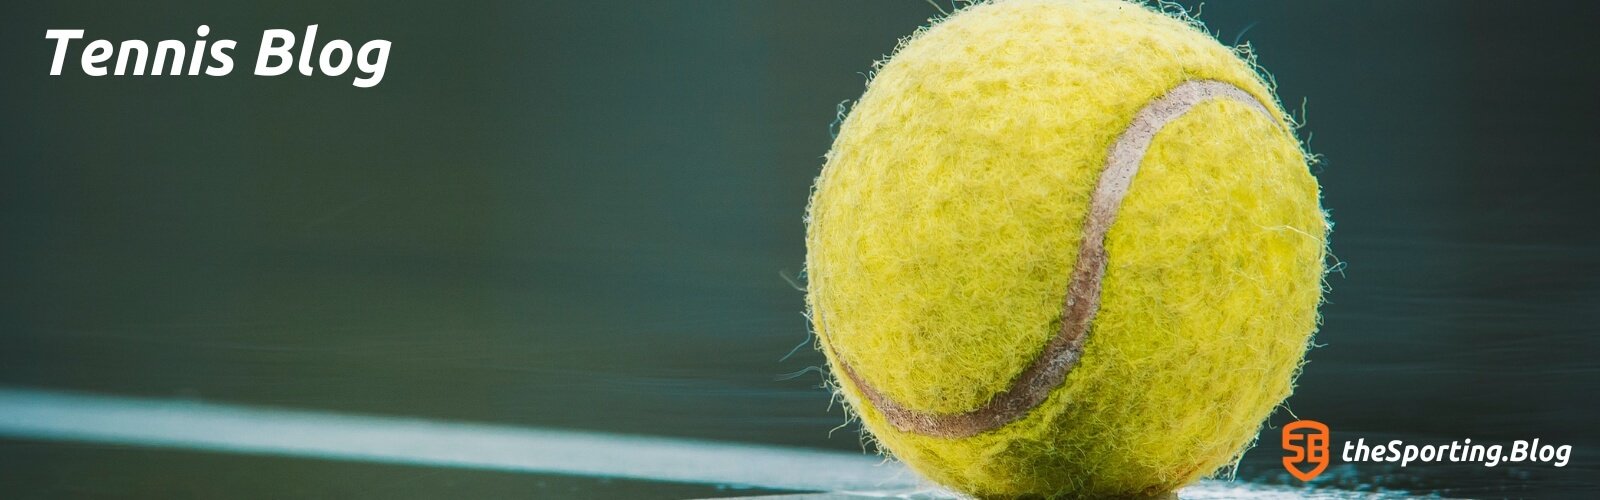 A tennis ball - helping show the fact that we have dedicated content on our tennis blog